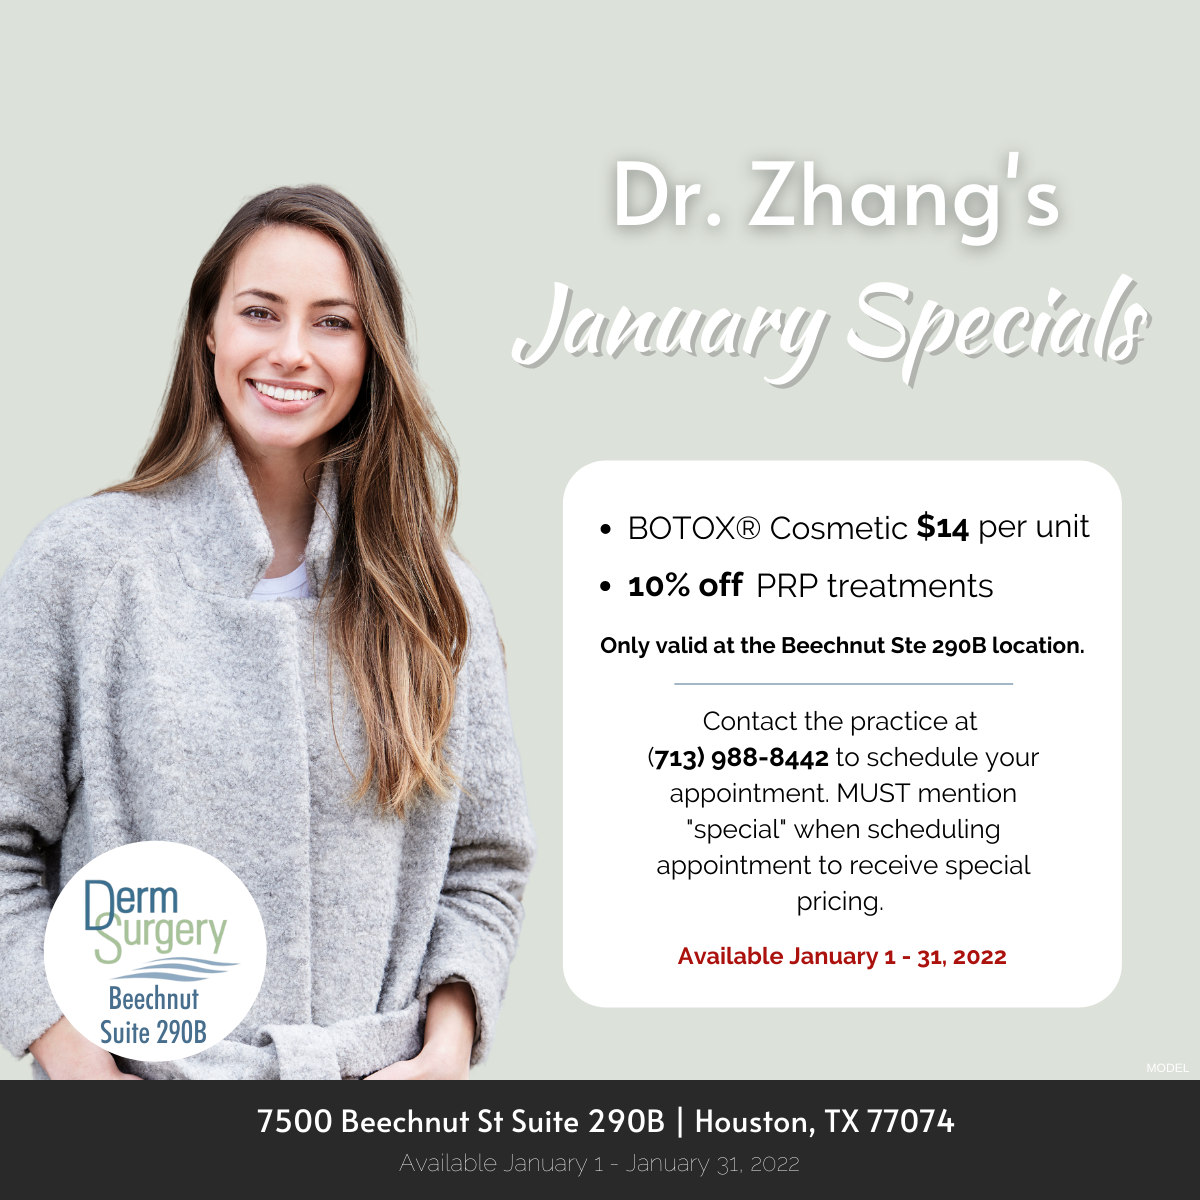 Dr. Zhang's January Specials